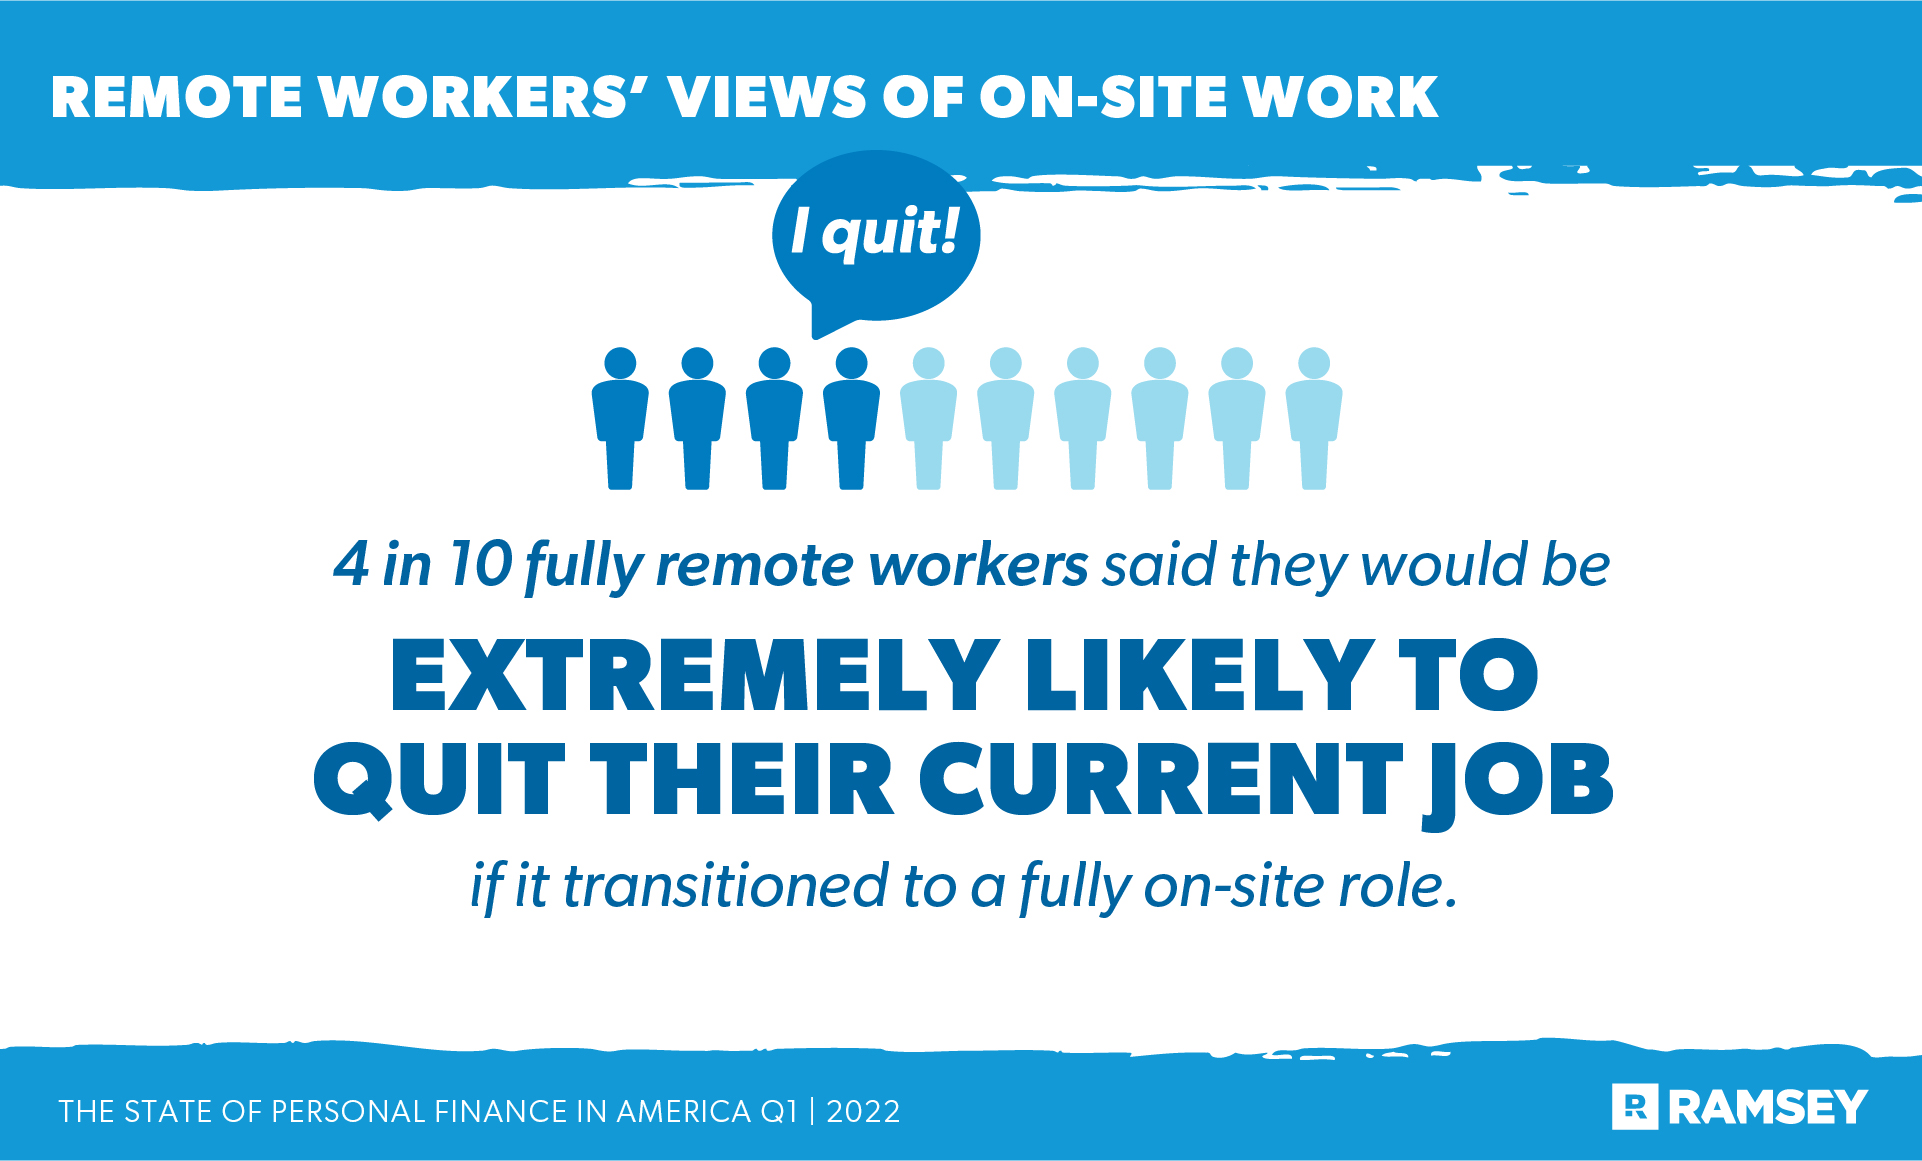 Remote workers’ views of on-site work